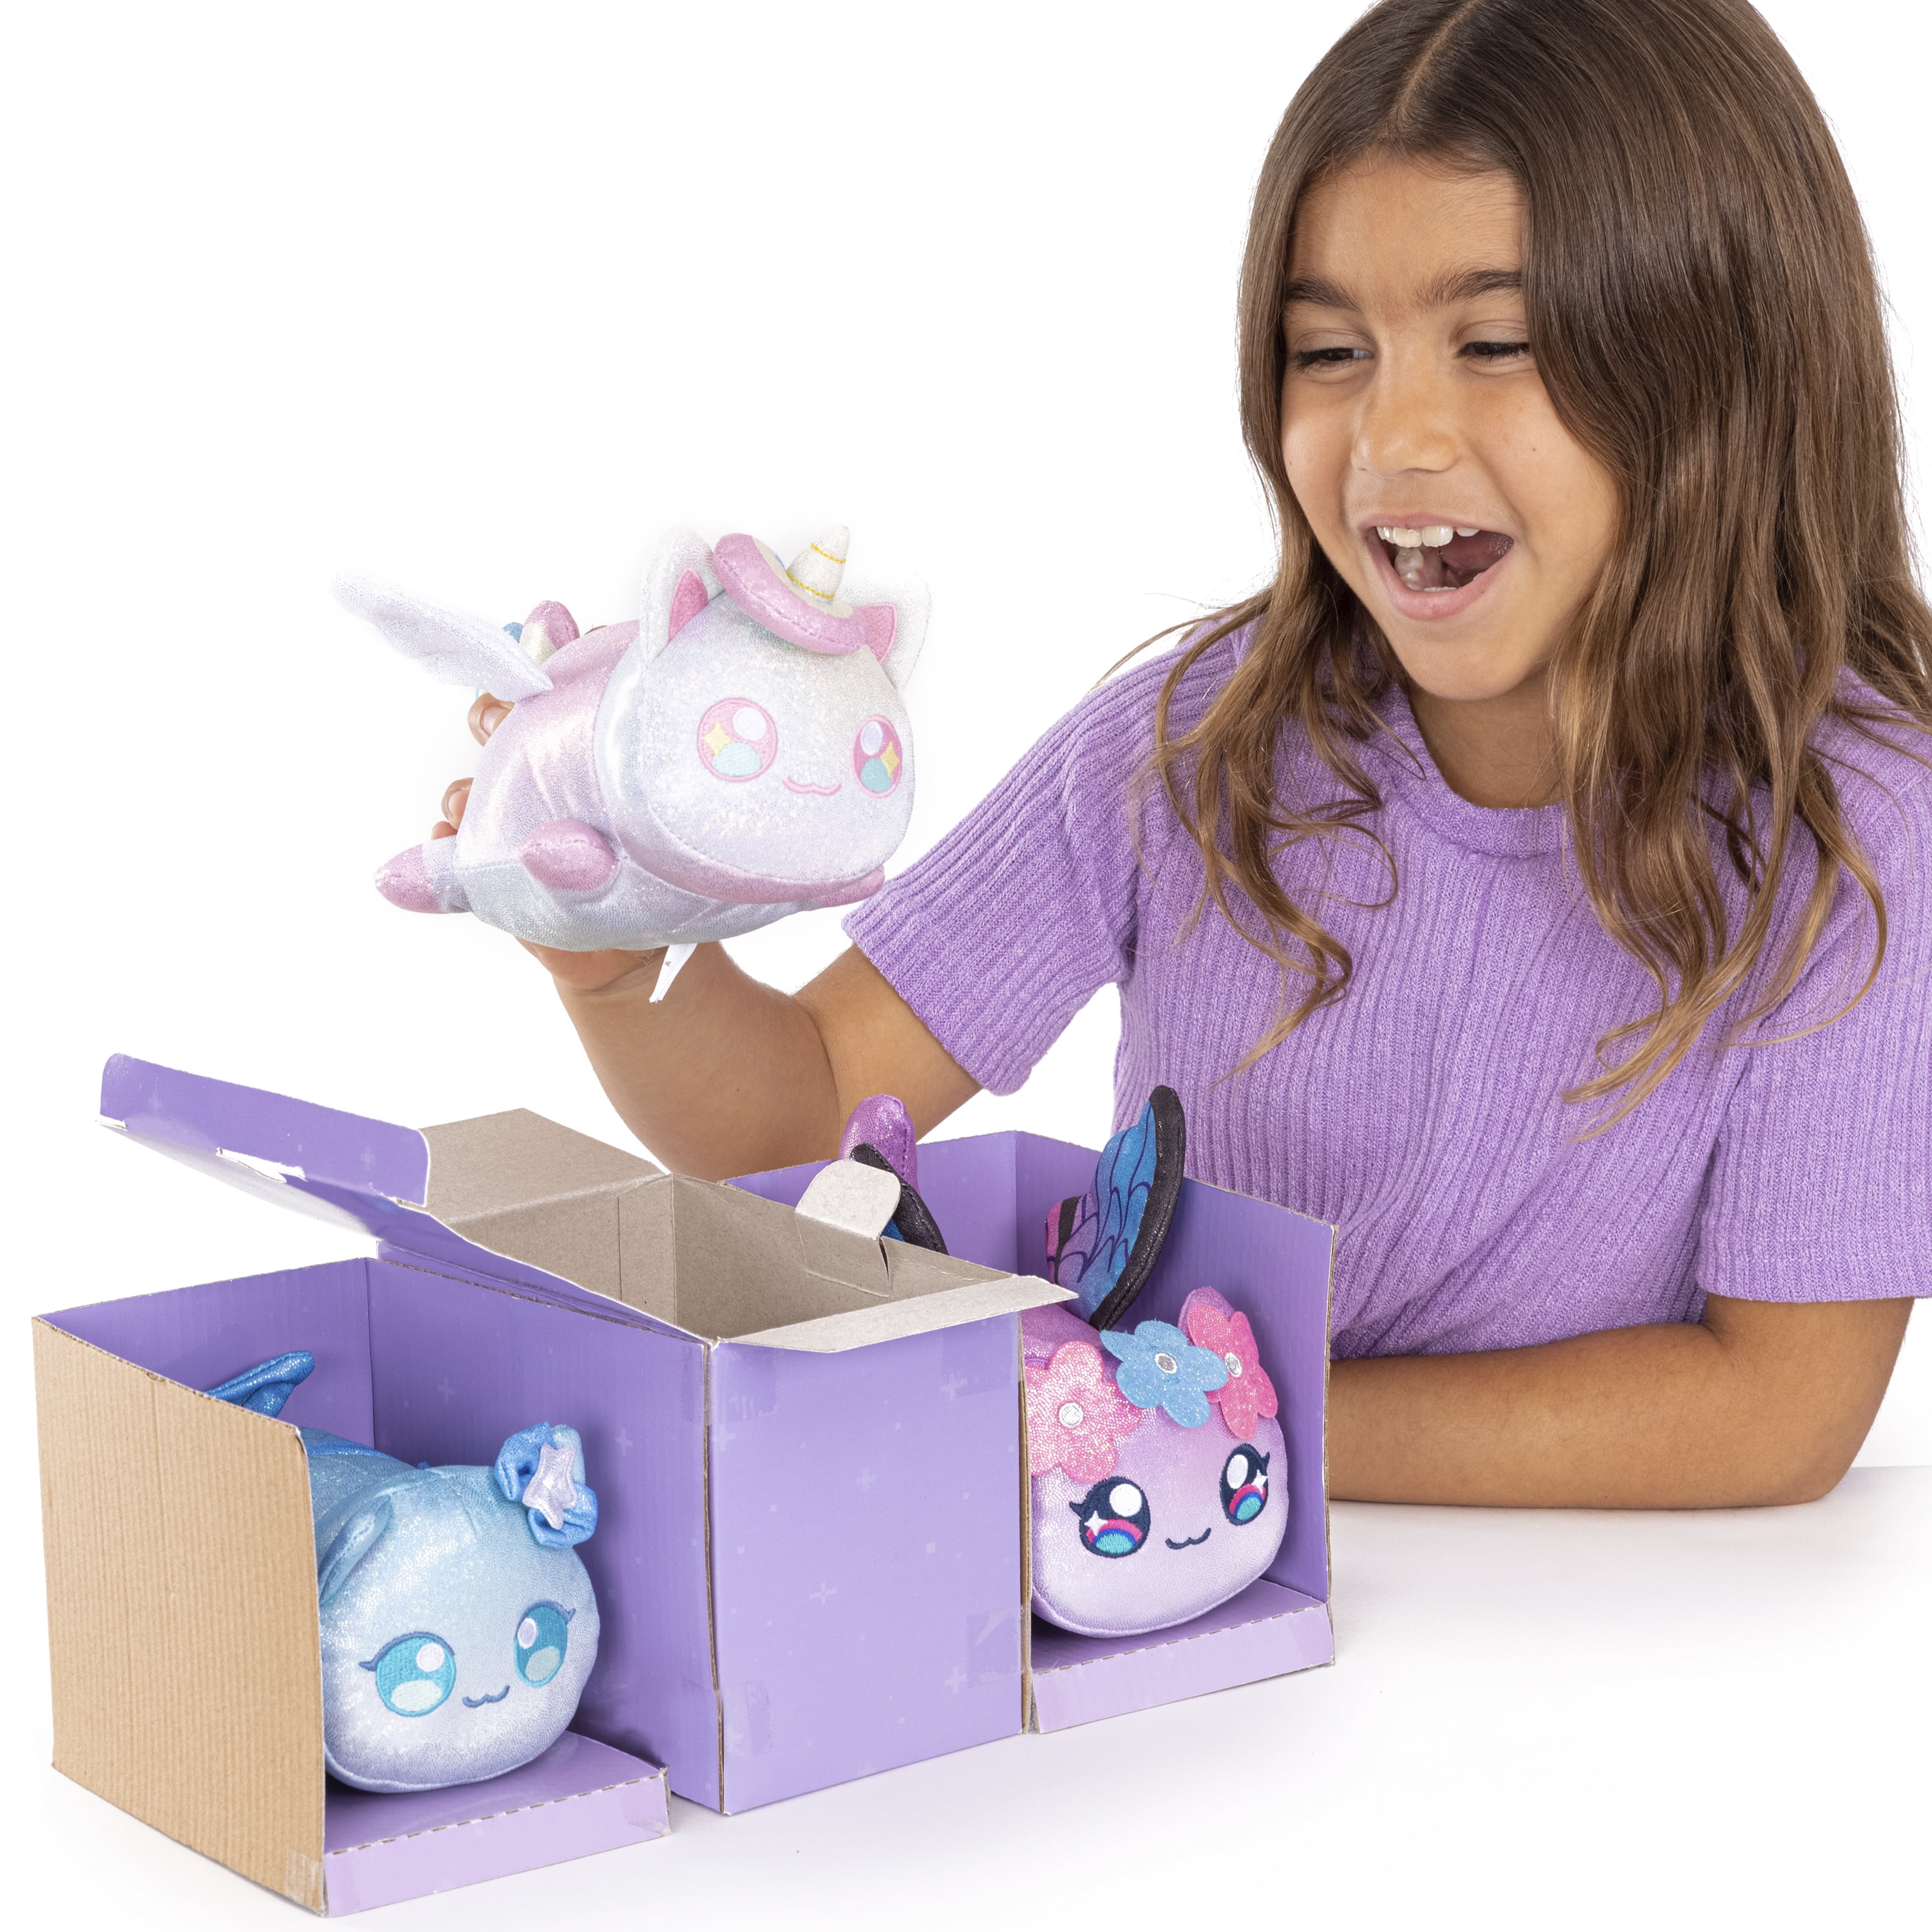 Aphmau MeeMeows Fashion Doll with 5 Mystery Surprises 810054661634